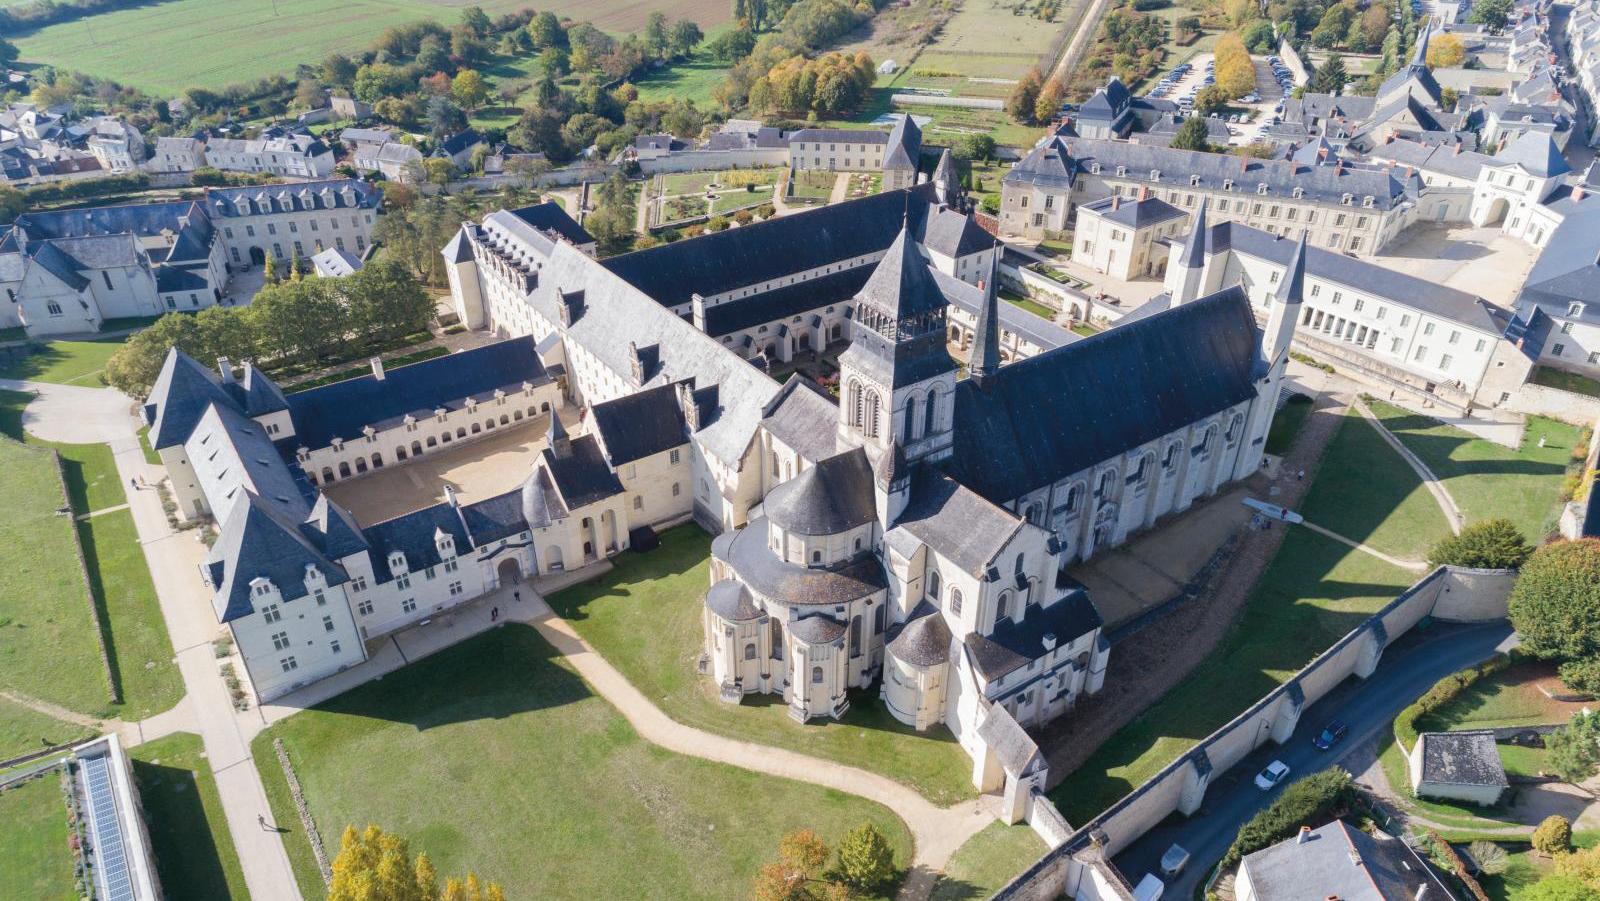 The Royal Abbaye of Fontevraud (sky view).© Région Pays de la Loire / M. Gross The Cligman Collection at Fontevraud Abbey: The Art of Conversation